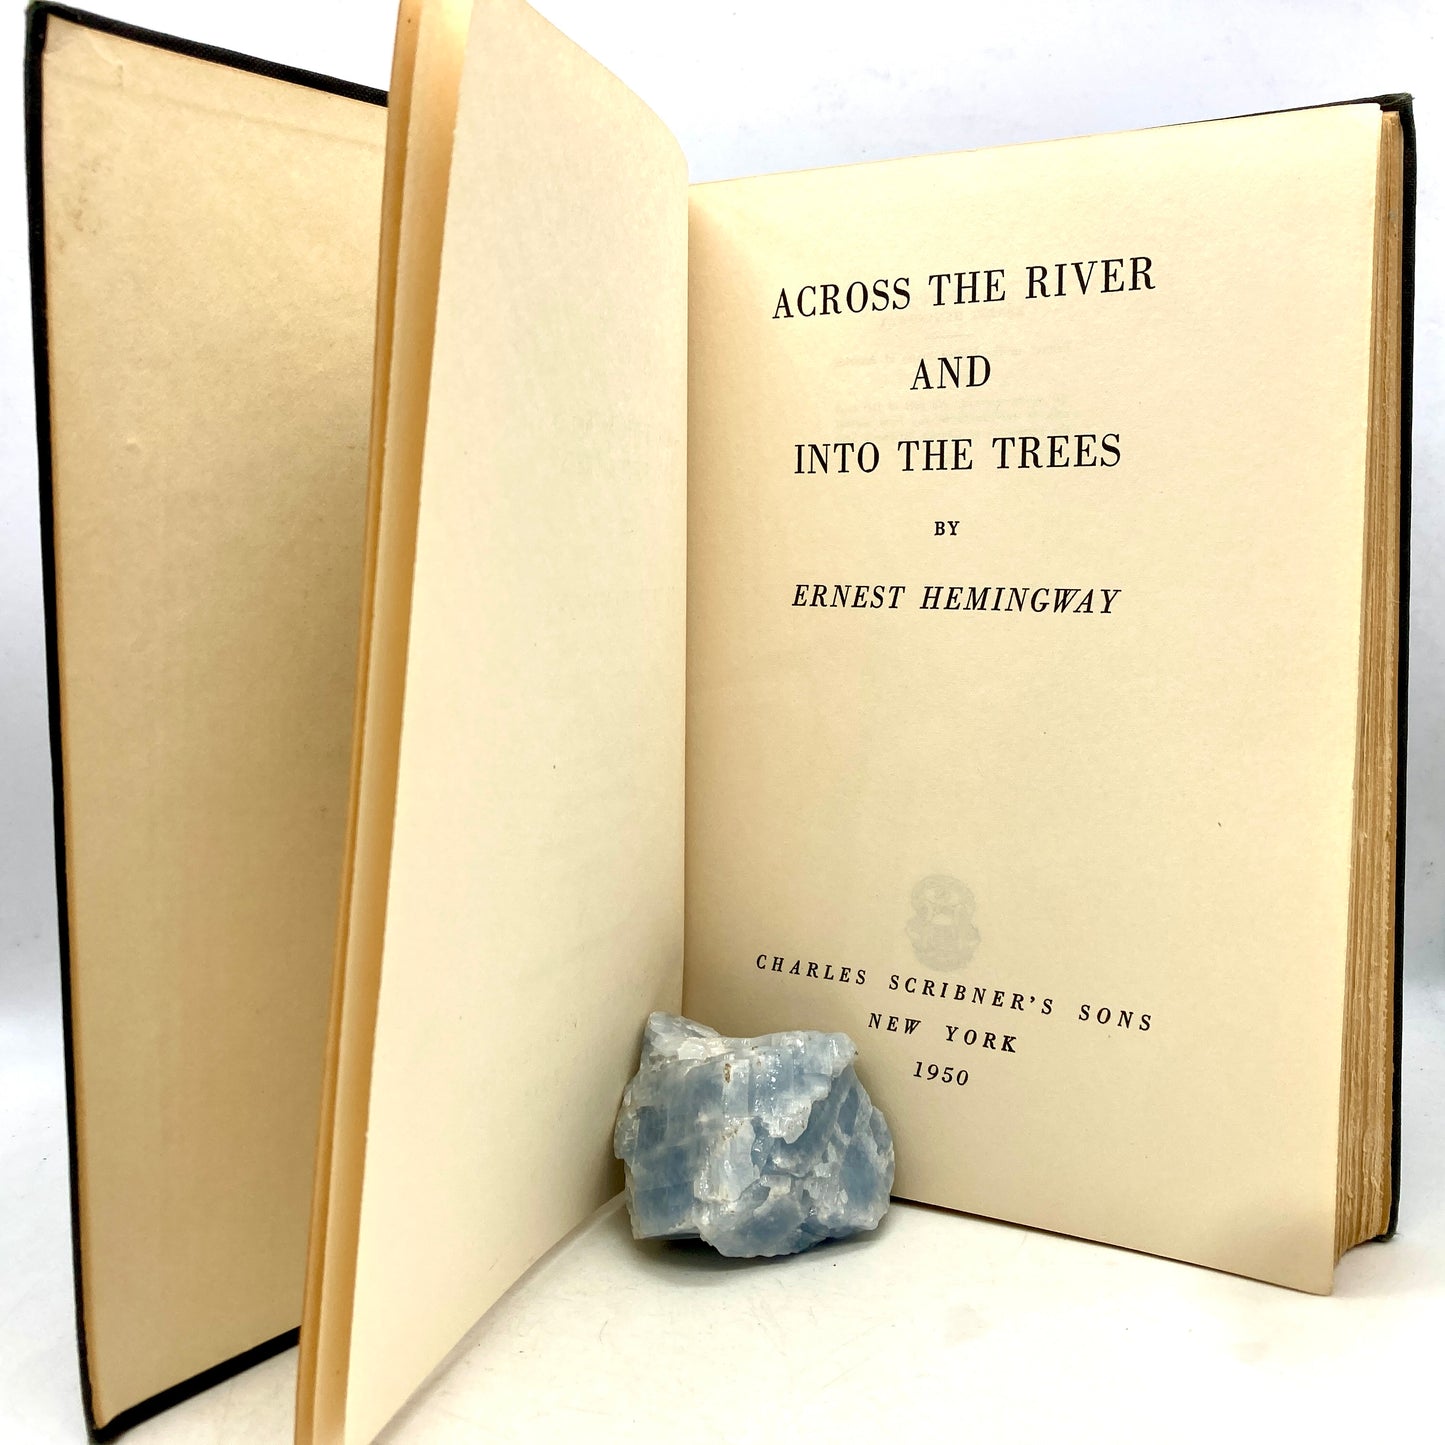 HEMINGWAY, Ernest "Across the River and Into the Trees" [Scribners, 1950] 1st Edition